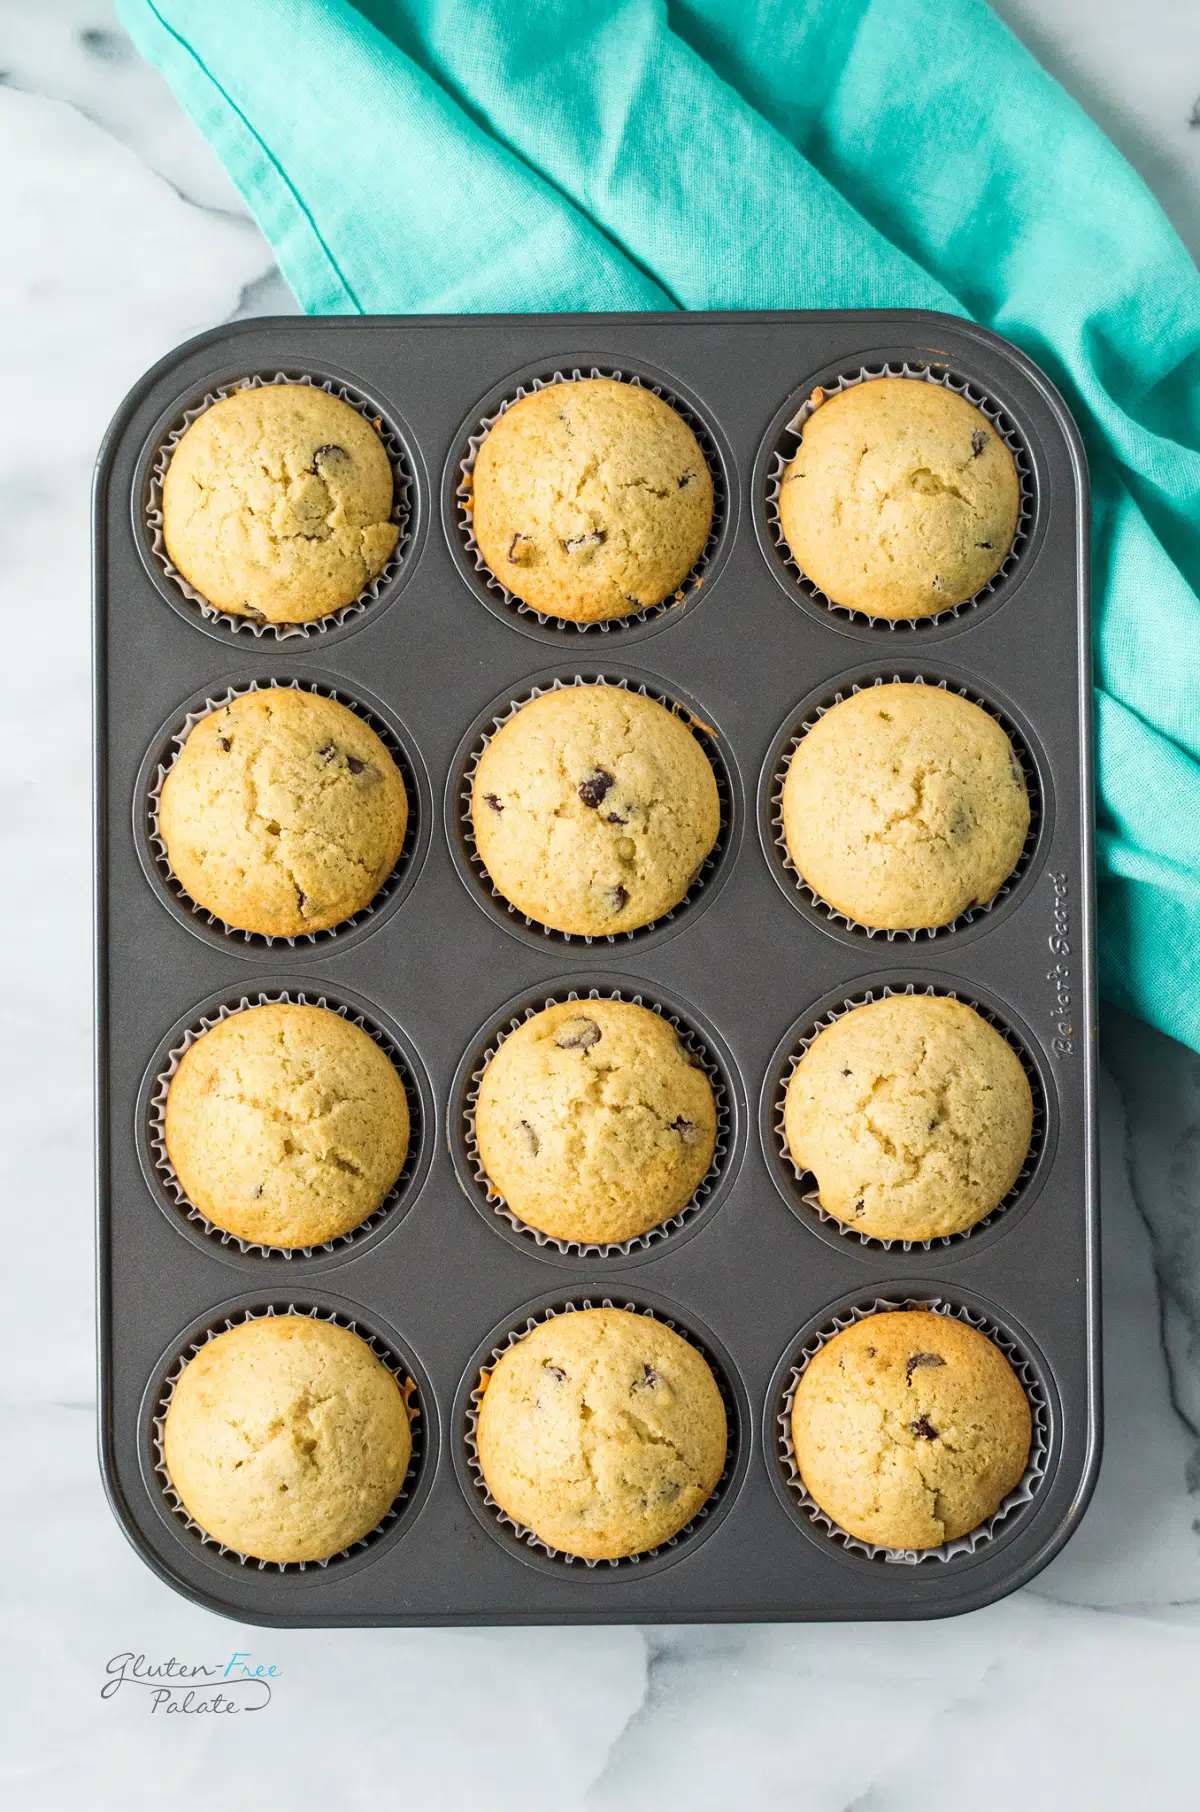 View from above of 12 gluten-free chocolate chip muffins in a muffin pan. a teal towel is underneath the pan.